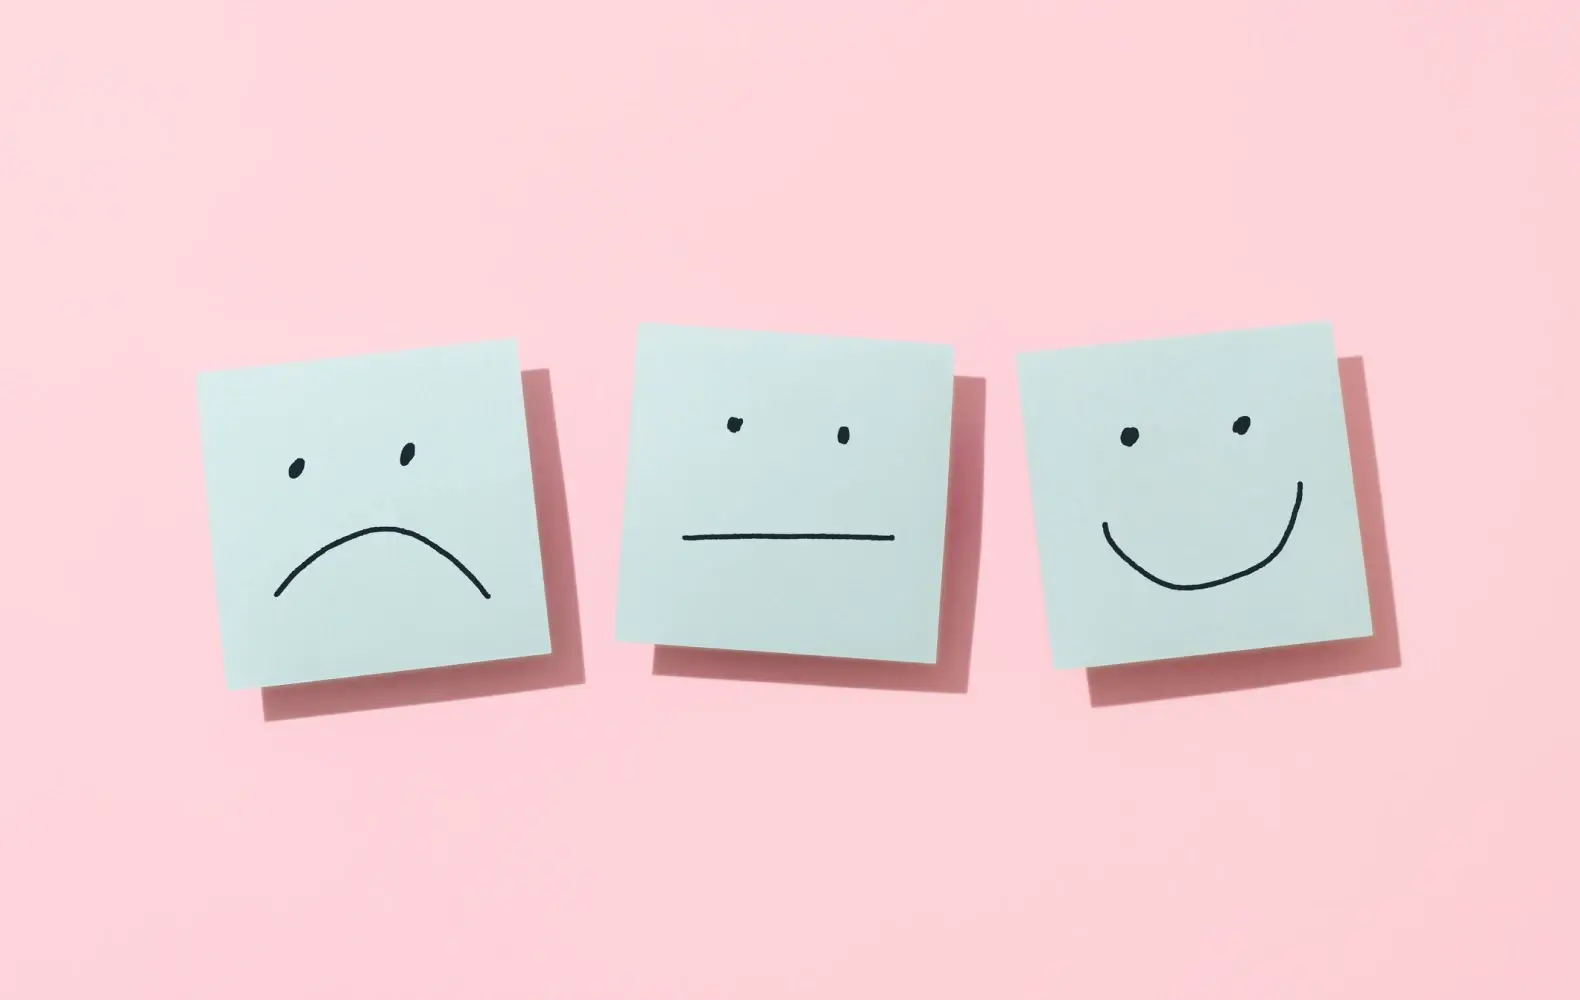 Three sticky notes with faces on them to indicate sad, neutral, and happy emotions.